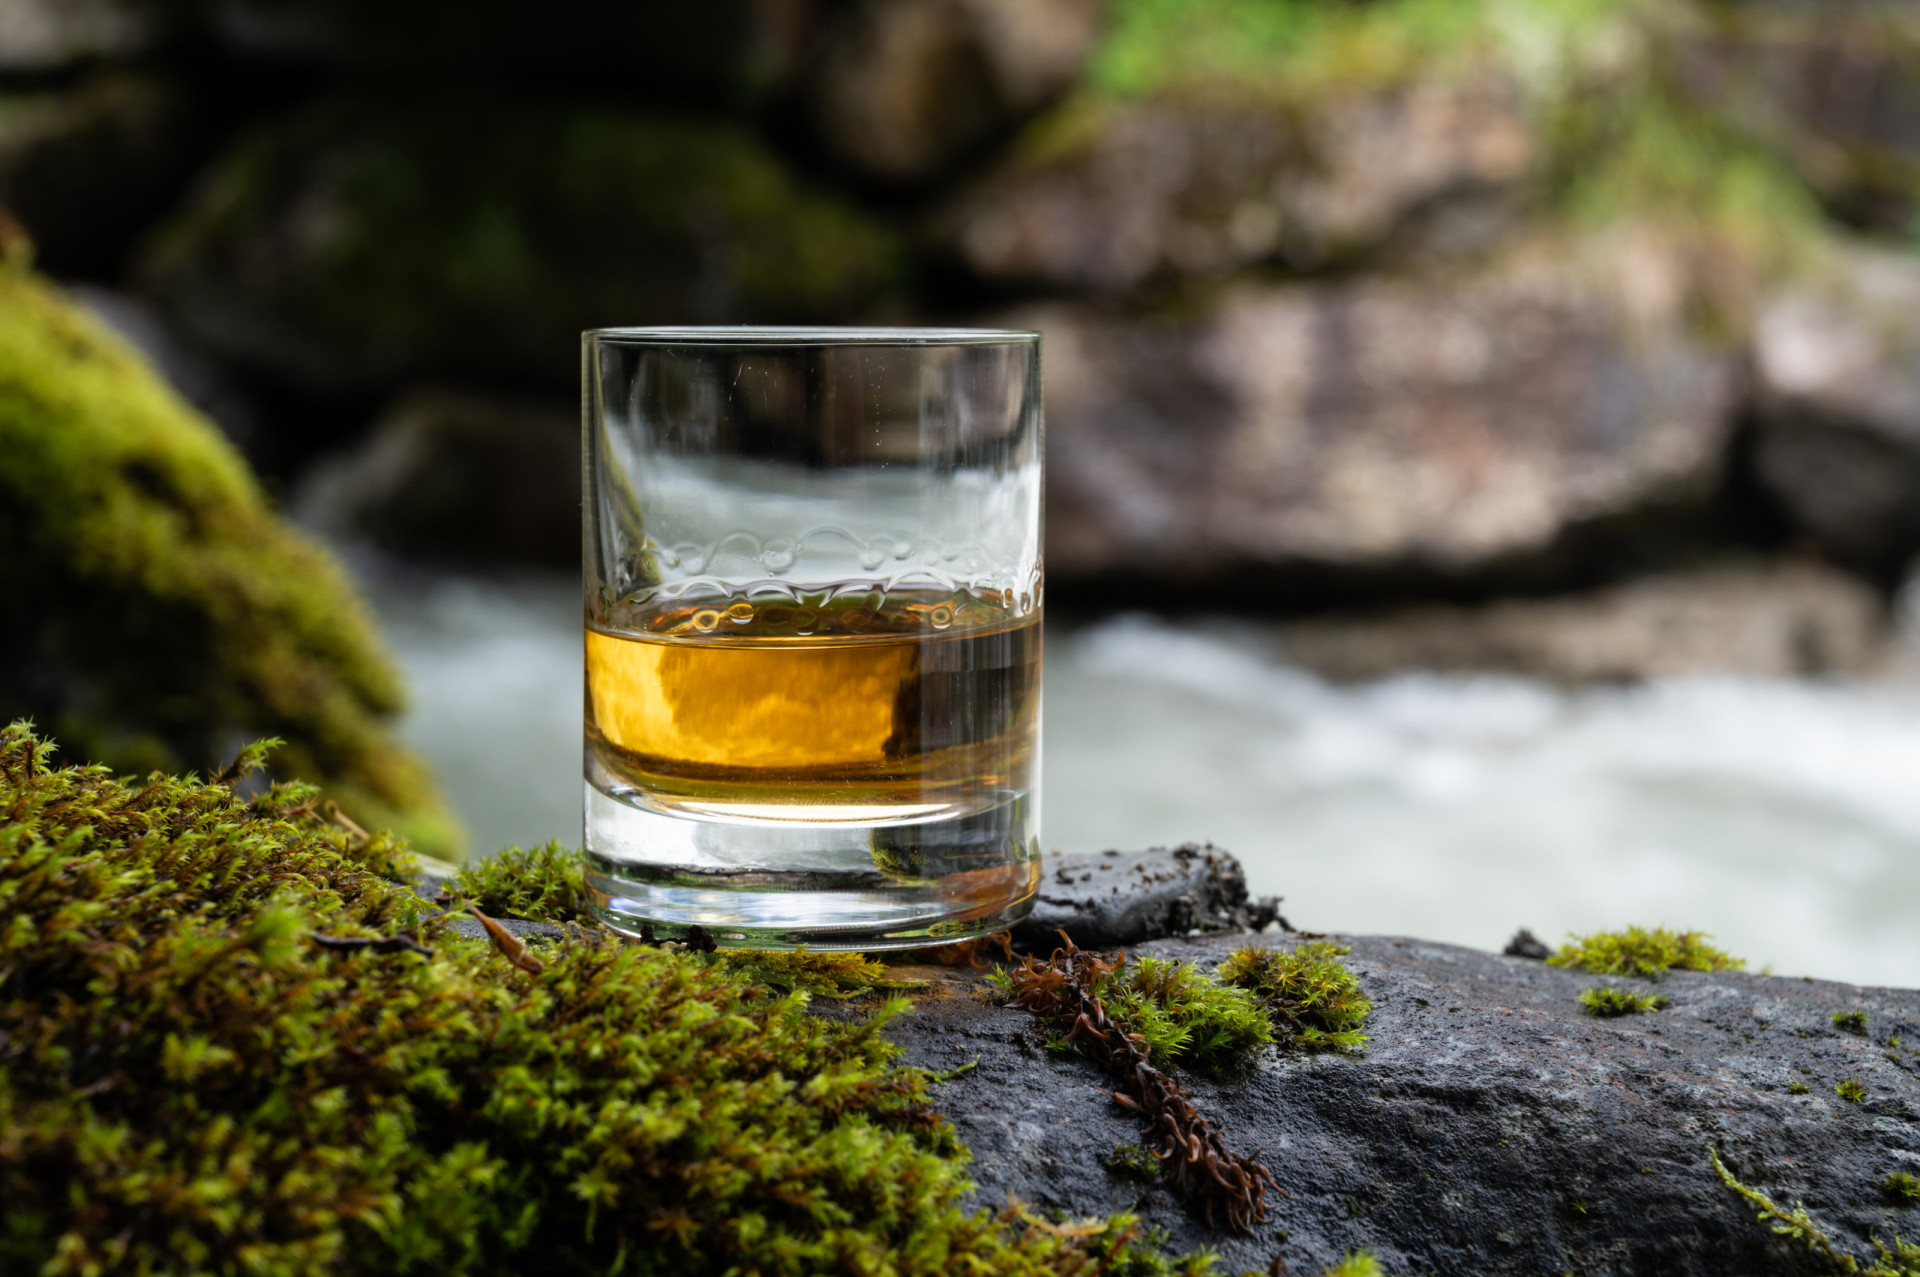 <p>The origins of whisky may very well be traced to Scotland and Ireland, but Wales does have its own distilleries that have competed avidly for global attention. Lovers of this liquor would be remiss if they don’t try to sip from the Welsh source.</p><p><a href="https://www.msn.com/en-us/community/channel/vid-7xx8mnucu55yw63we9va2gwr7uihbxwc68fxqp25x6tg4ftibpra?cvid=94631541bc0f4f89bfd59158d696ad7e">Follow us and access great exclusive content every day</a></p>